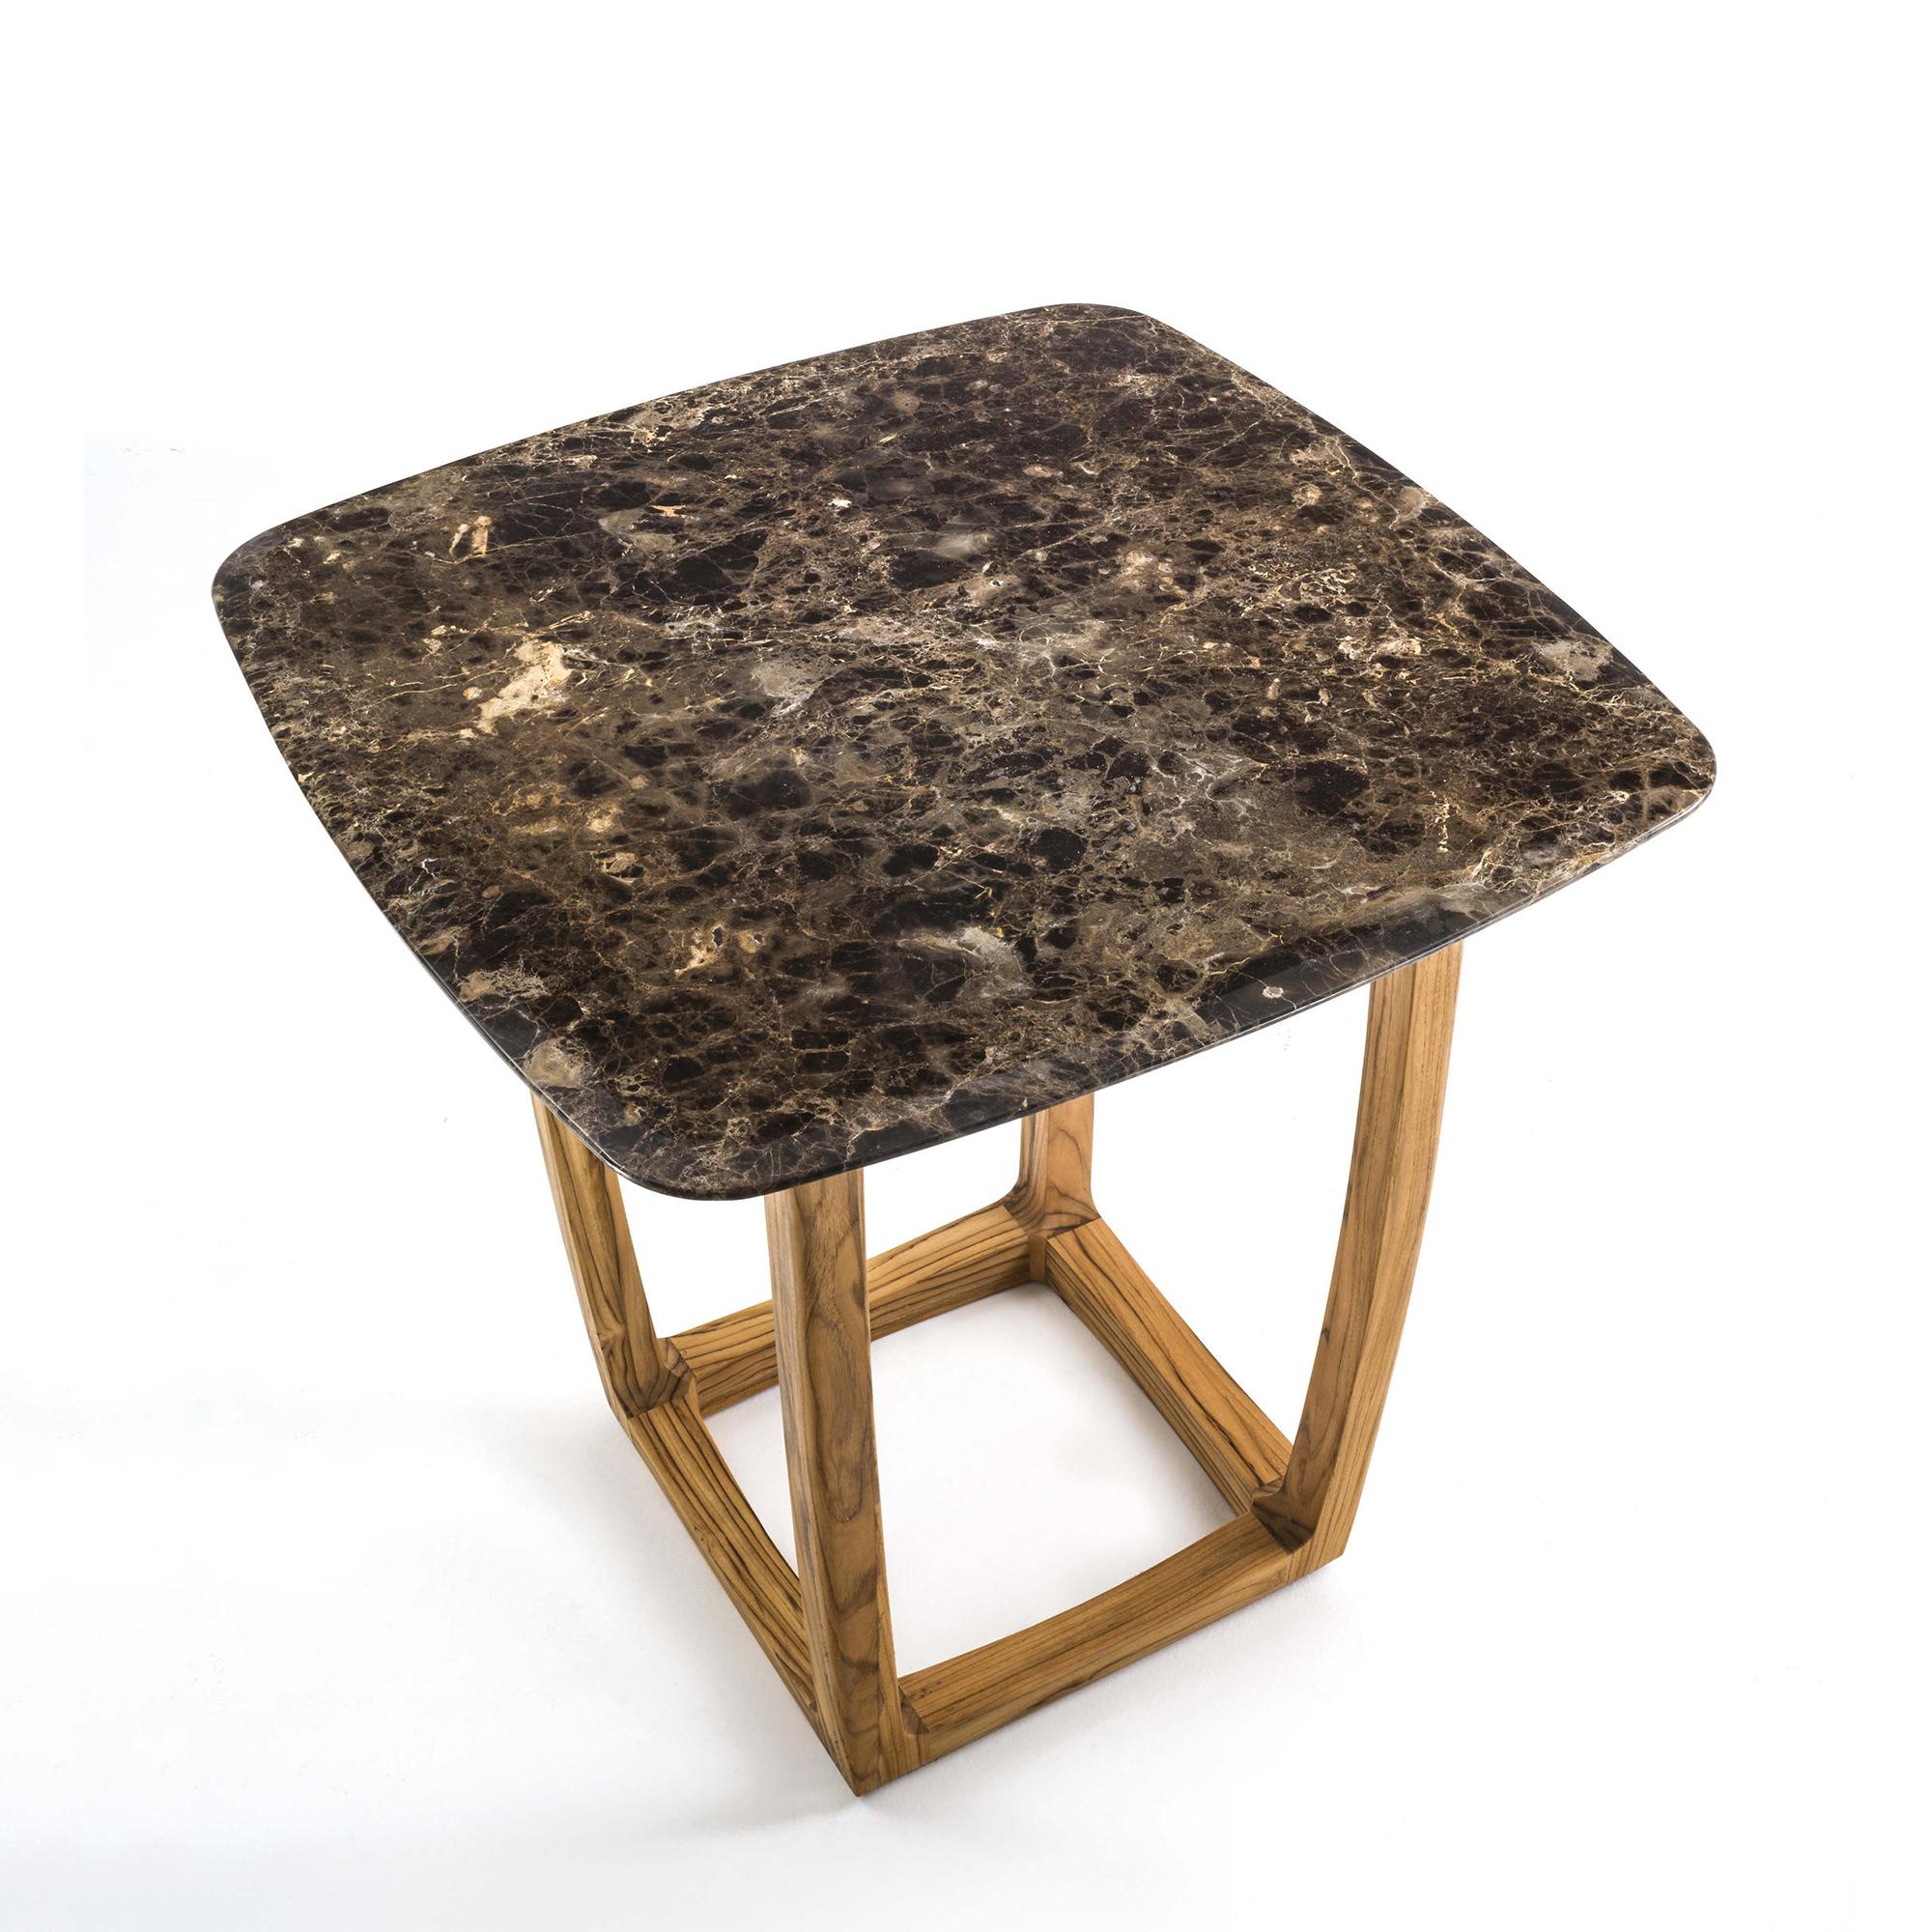 Center table trooper outdoor or indoor with structure in
solid natural teak, with  brown marble emperador polished top.
Wood treated with natural pine extracts.
Also available in Trooper coffee table.
